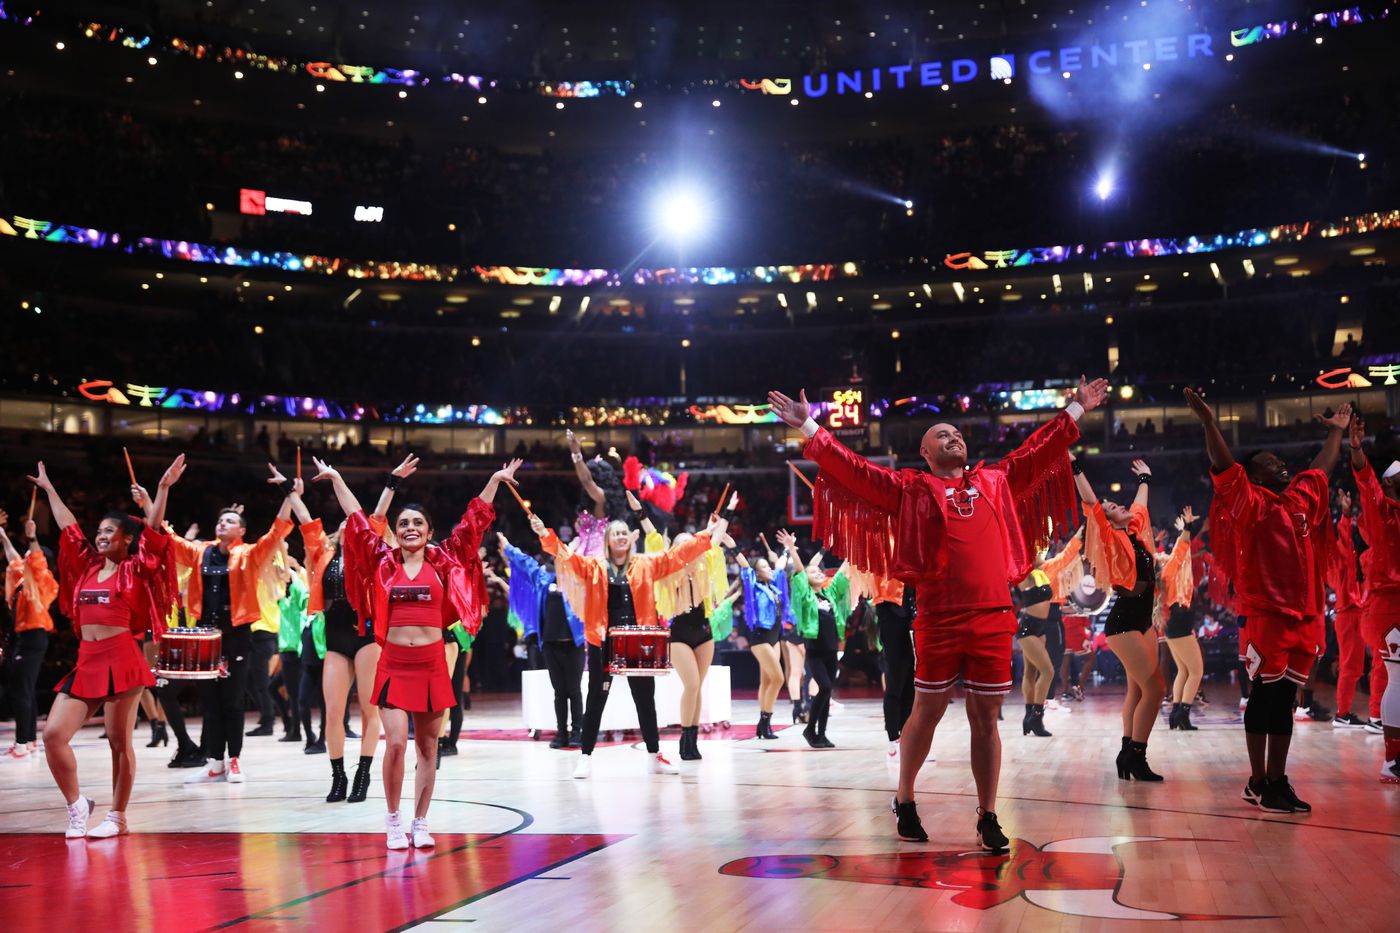 Performers take the court during halftime between the Chicago Bulls and Washington Wizards at United Center on Jan. 7, 2022, in Chicago.